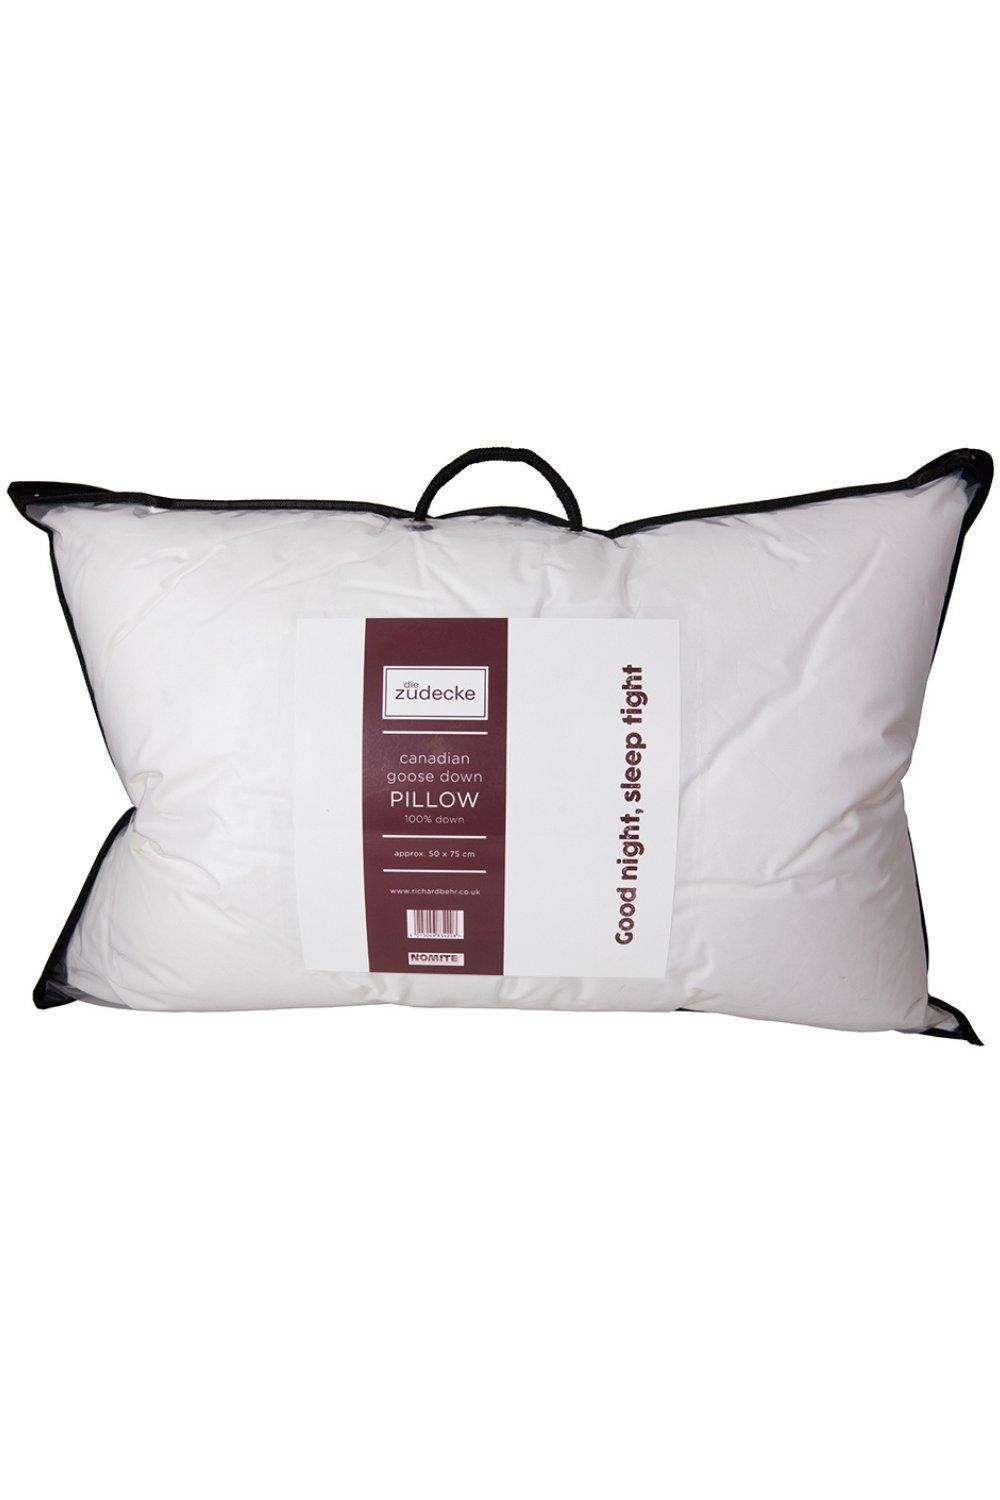 Canadian Goose Down Surround Pillow